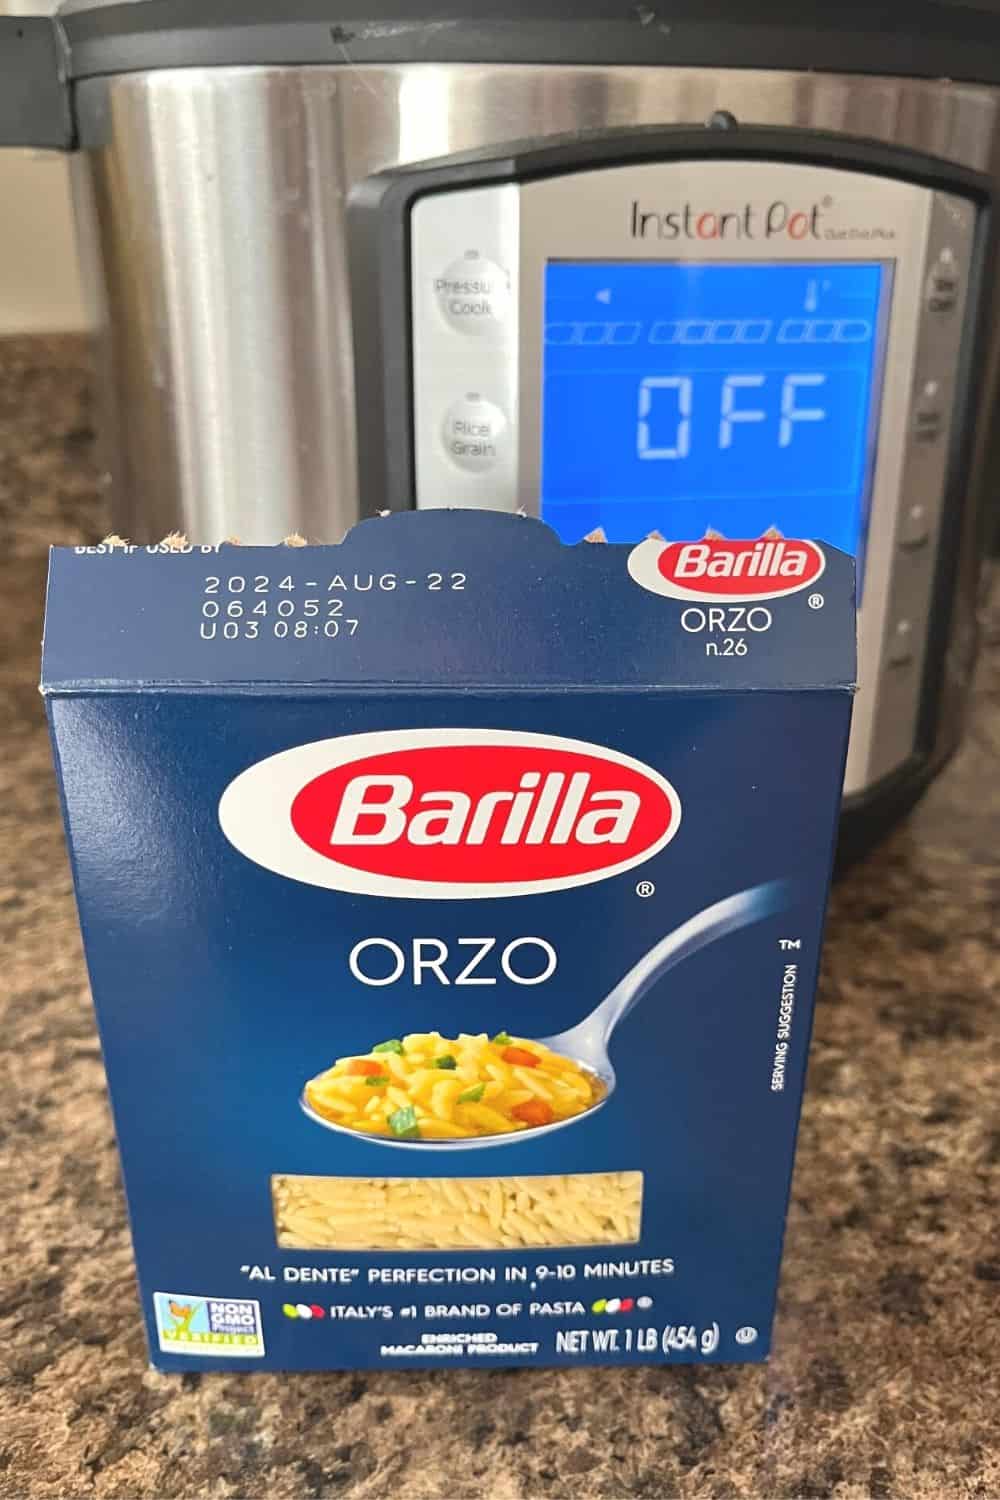 a box of Barilla orzo pasta in front of the Instant Pot electric pressure cooker